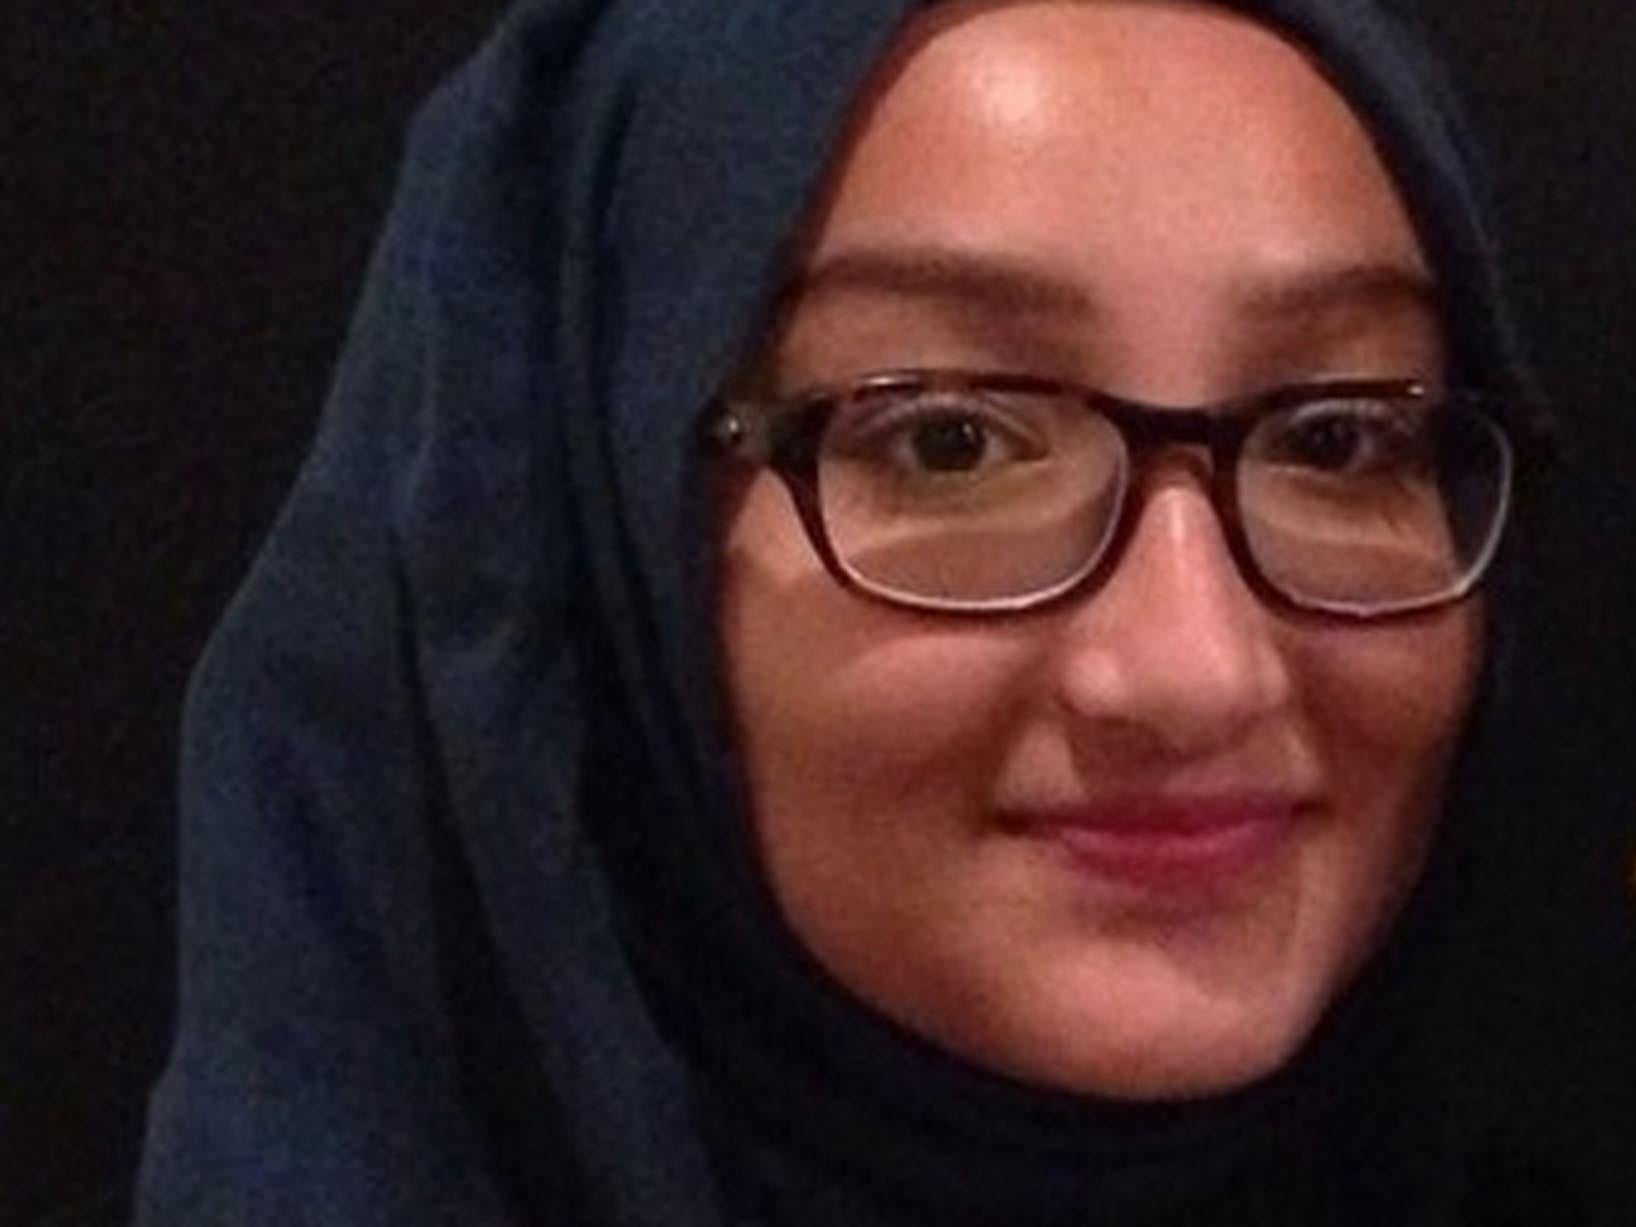 Kadiza Sultana, who fled to Syria to join Isis in February 2015